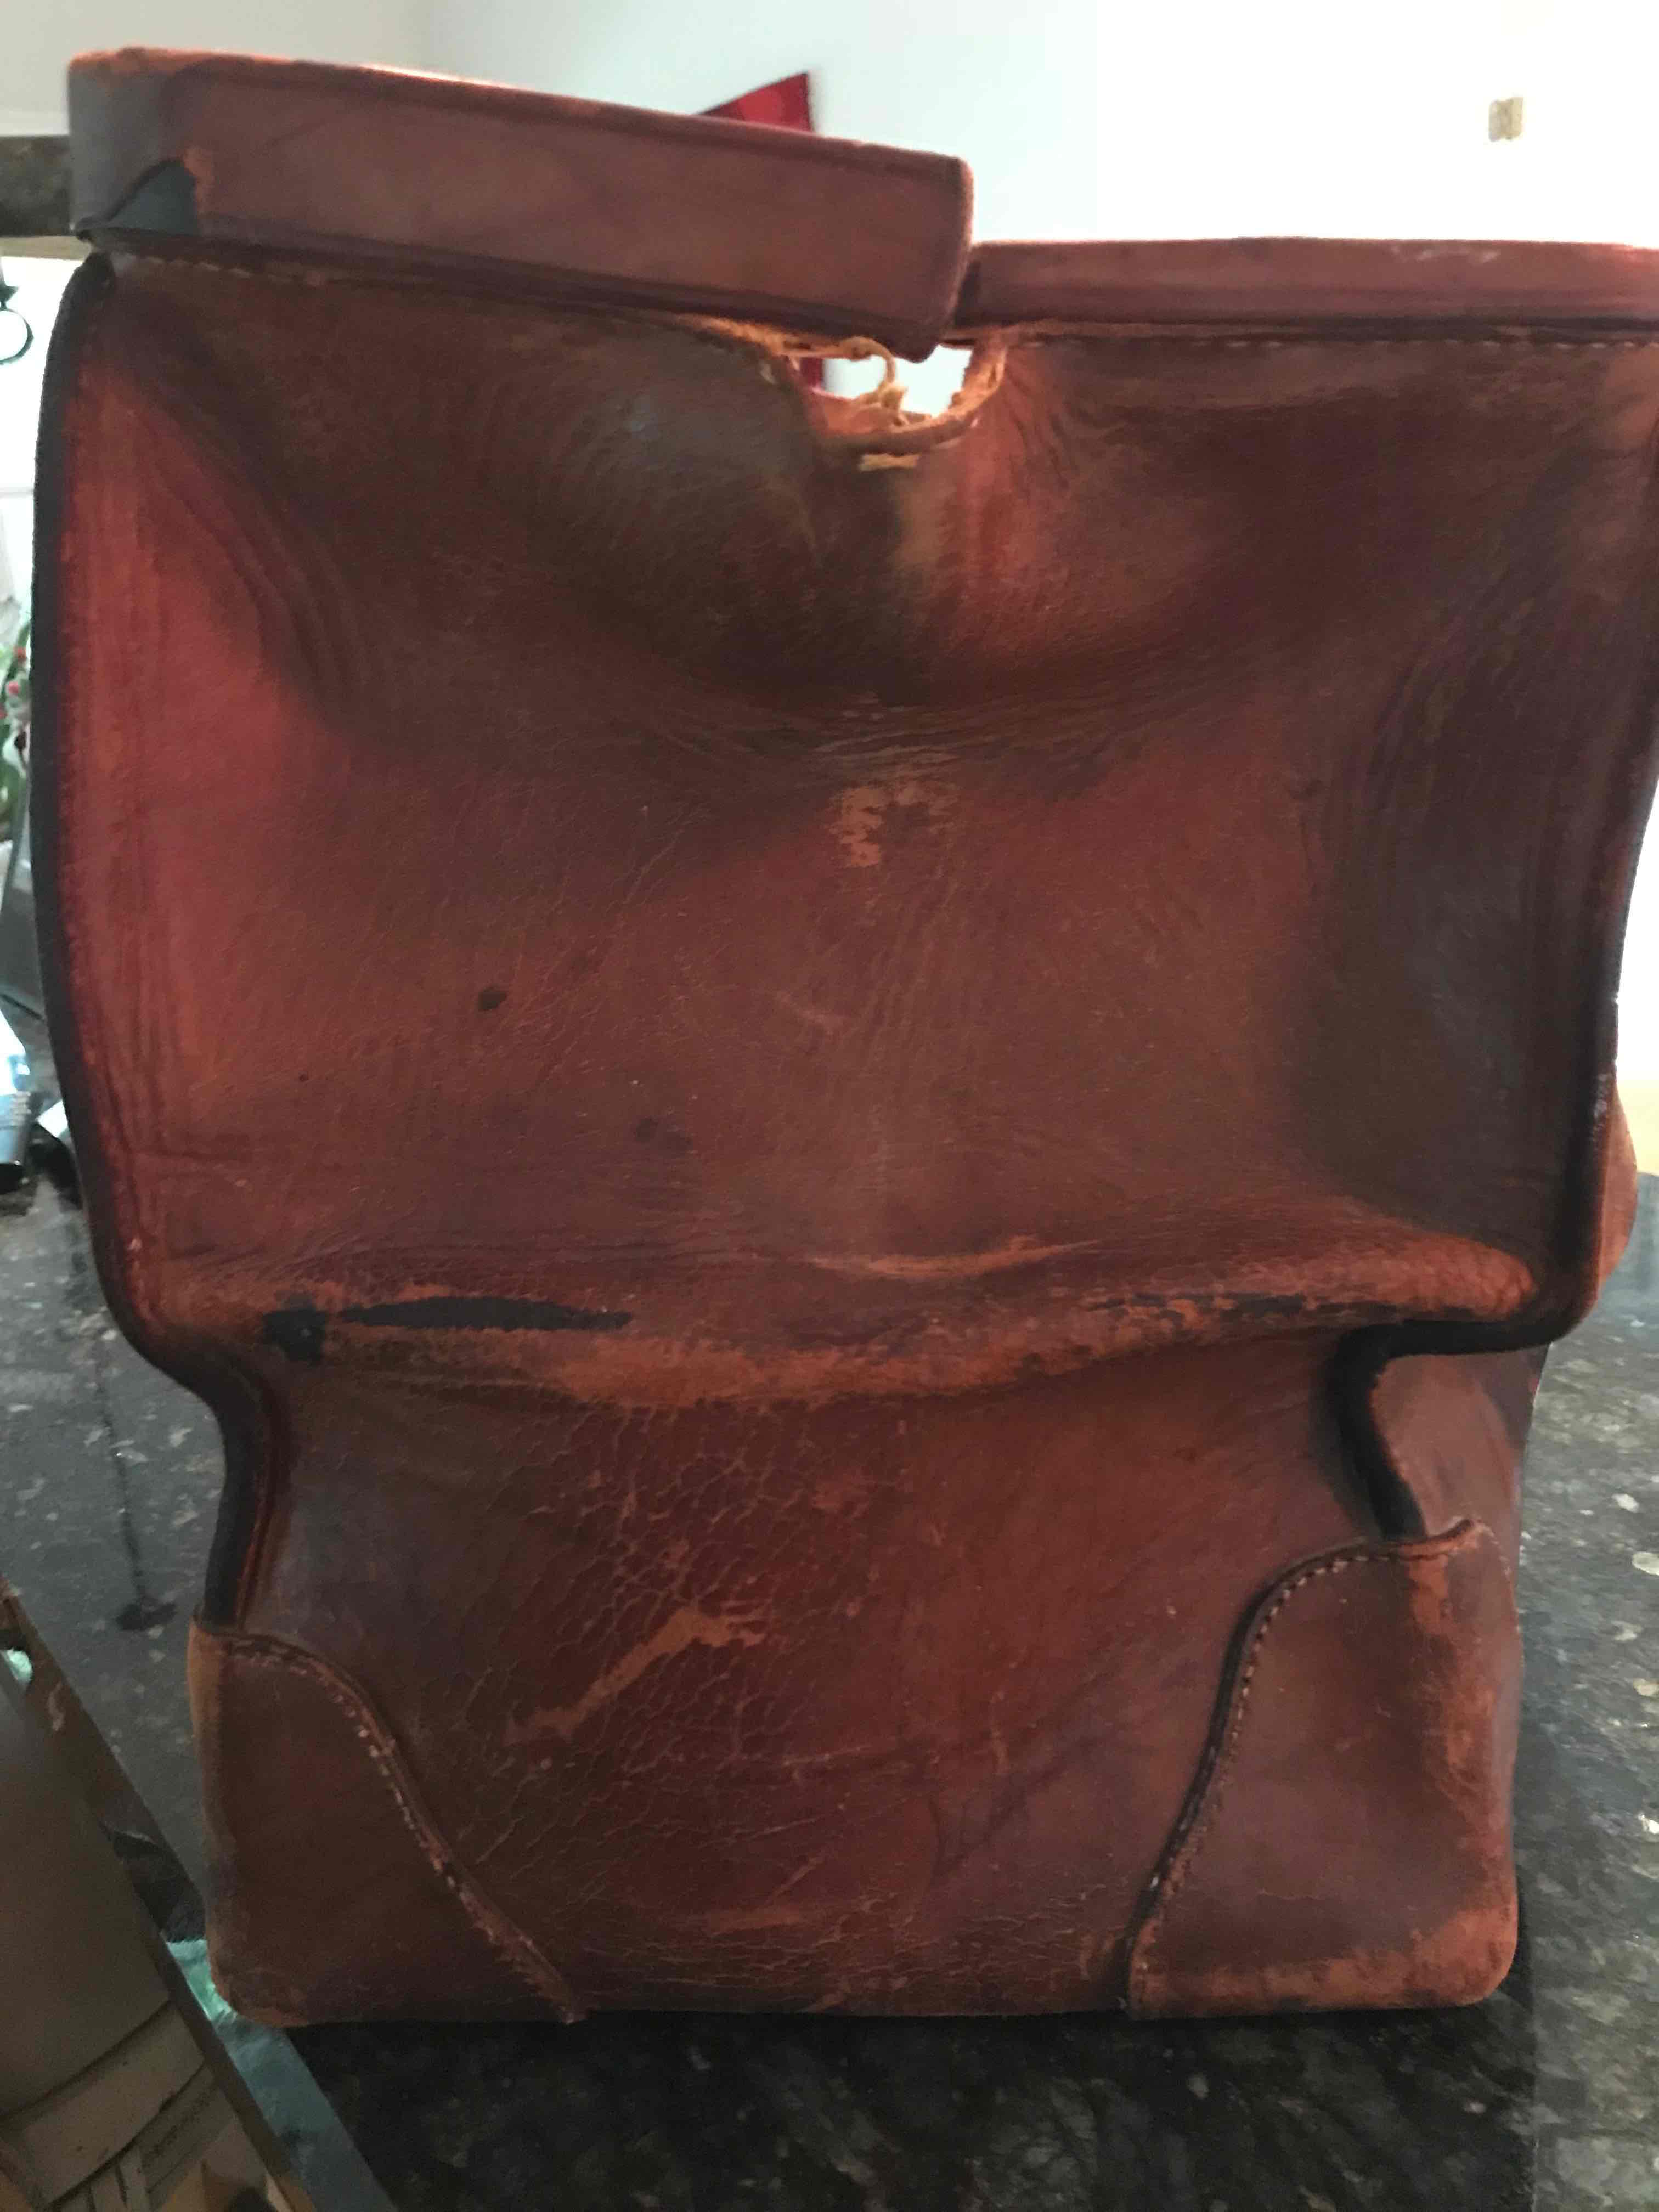 Tips for restoration - Bought this bag a while back, leather was worn and  dark when i bought it but id like to restore it , what is the most  effective way